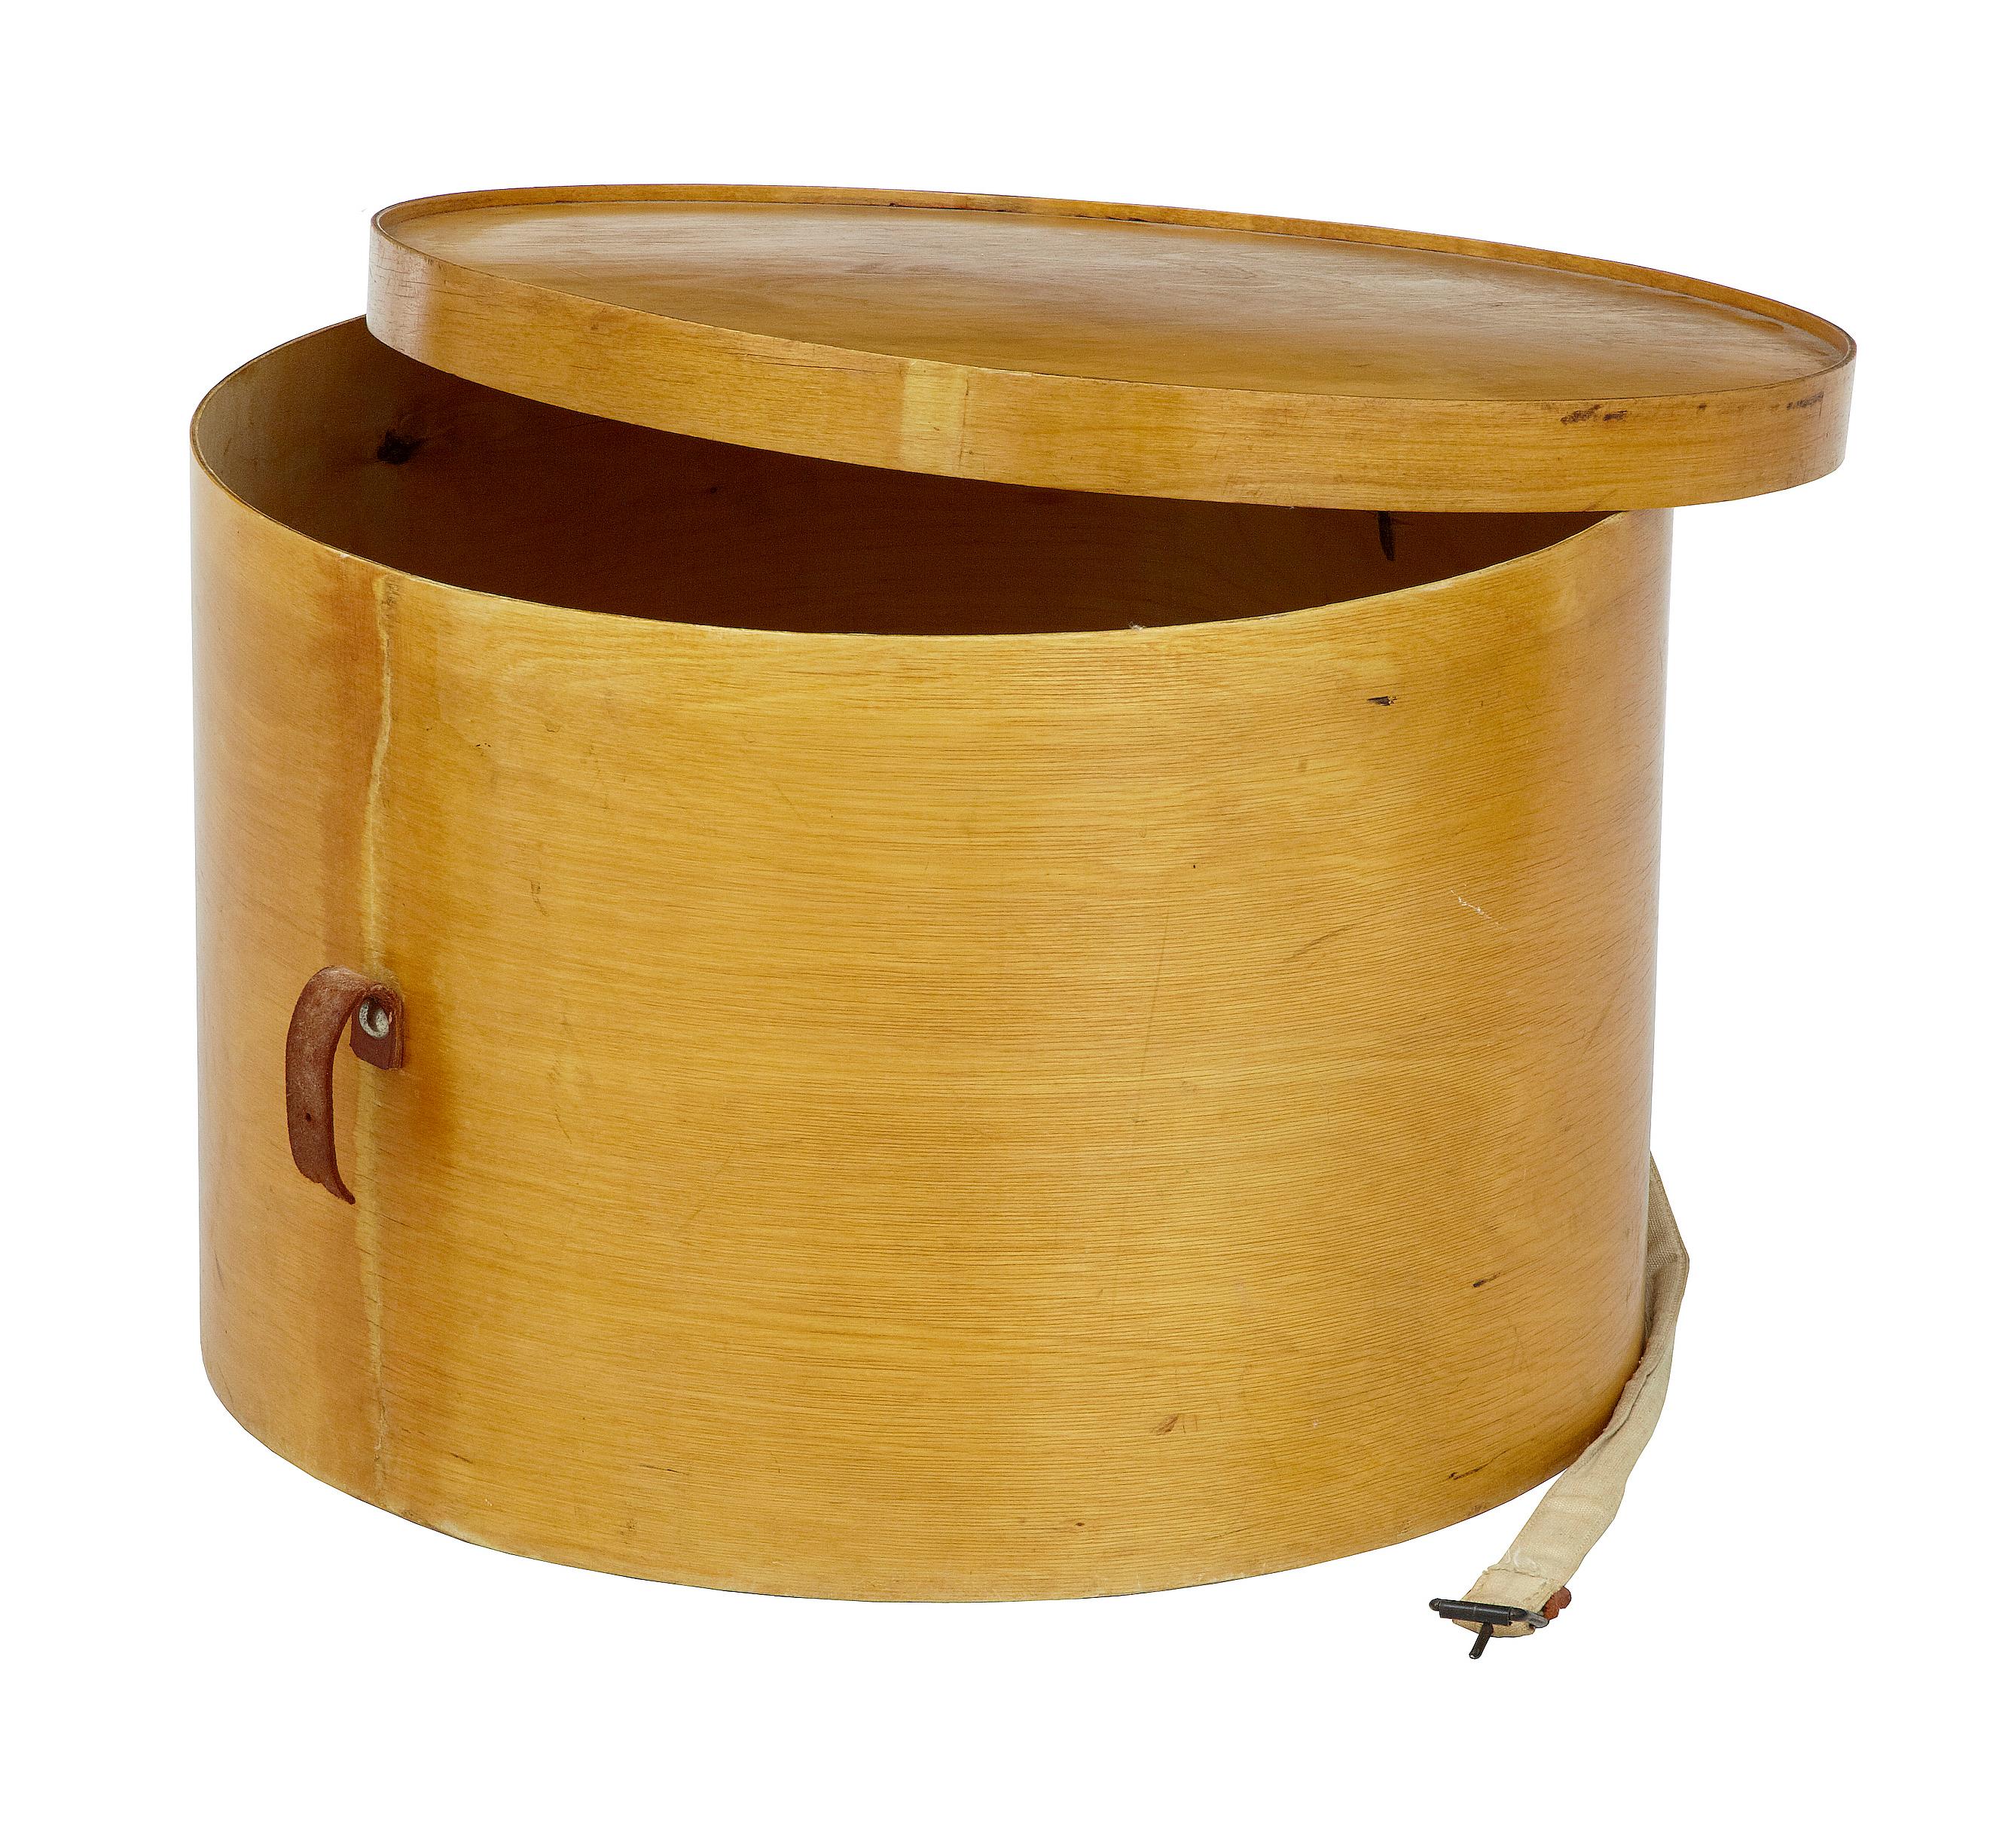 1920s Luterma Reval birch bentwood hat box.

Good quality shaped plywood box by the reknowned makers luterma. Stamped on the inside of lid and on the base. In generally good condition,

Strap has broken and in need of replacement.